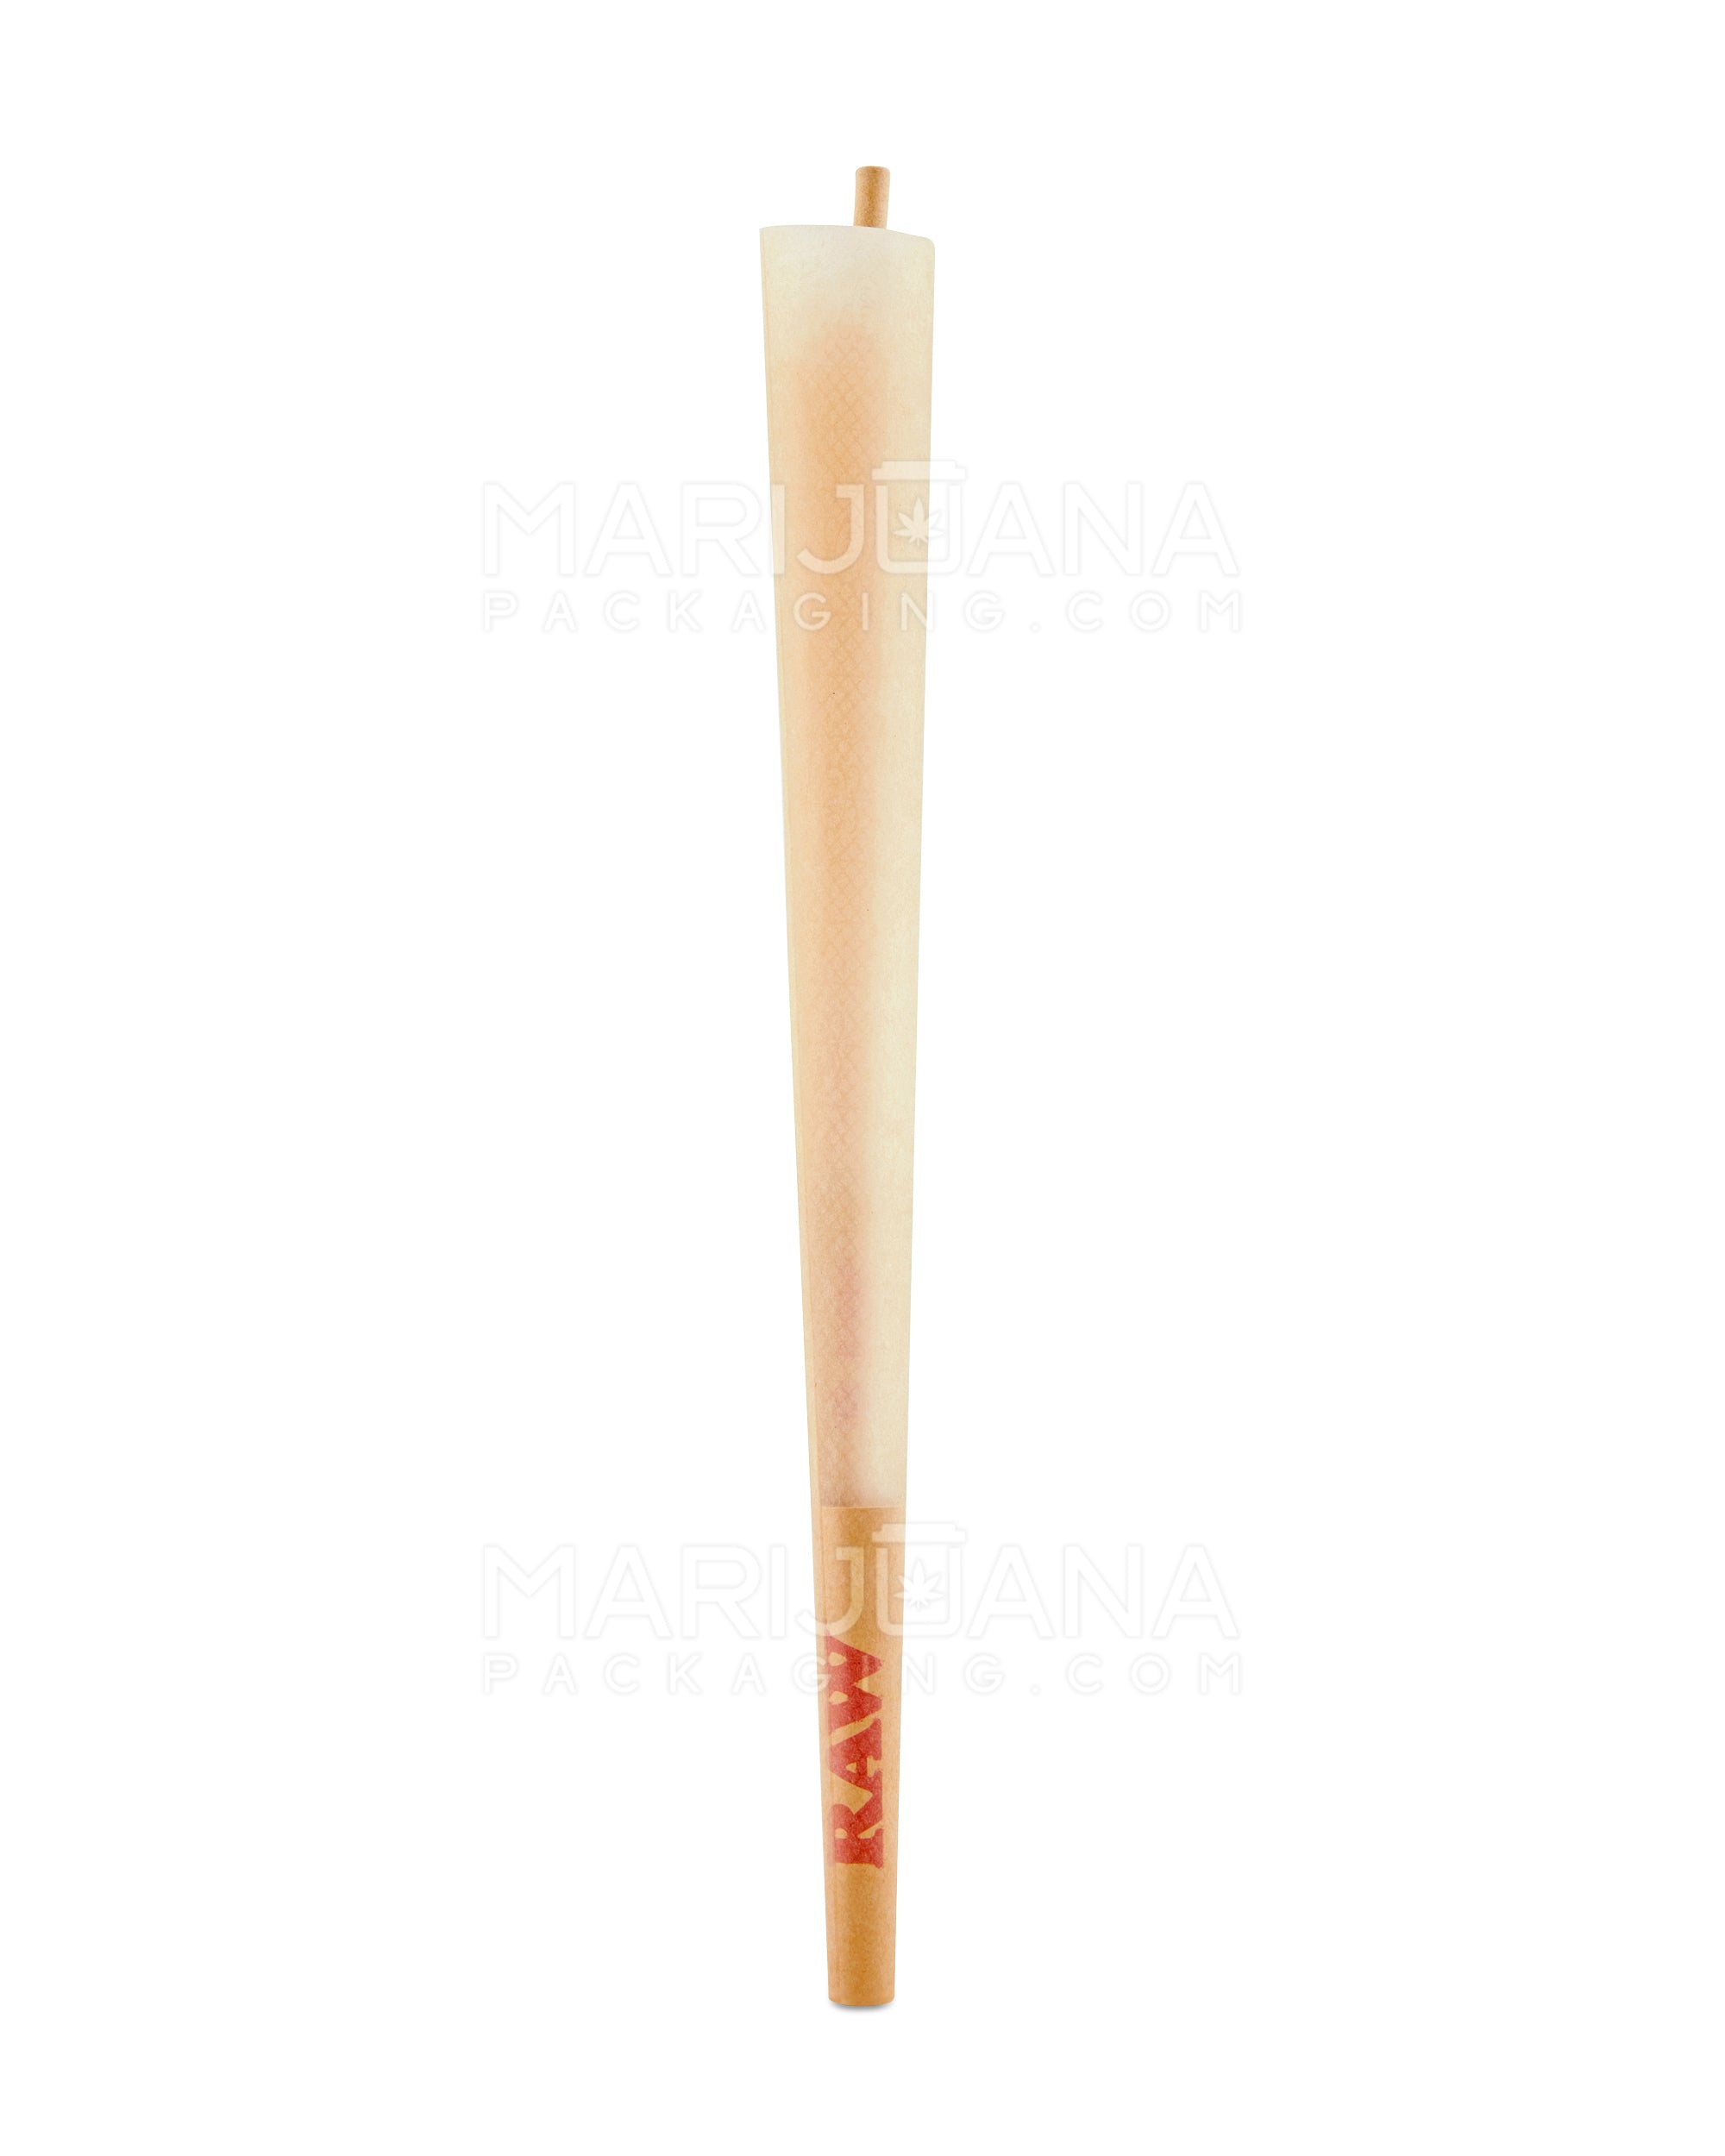 RAW | 'Retail Display' 5 Stage RAWket Pre-Rolled Cones | 180mm - Unbleached Paper - 15 Count